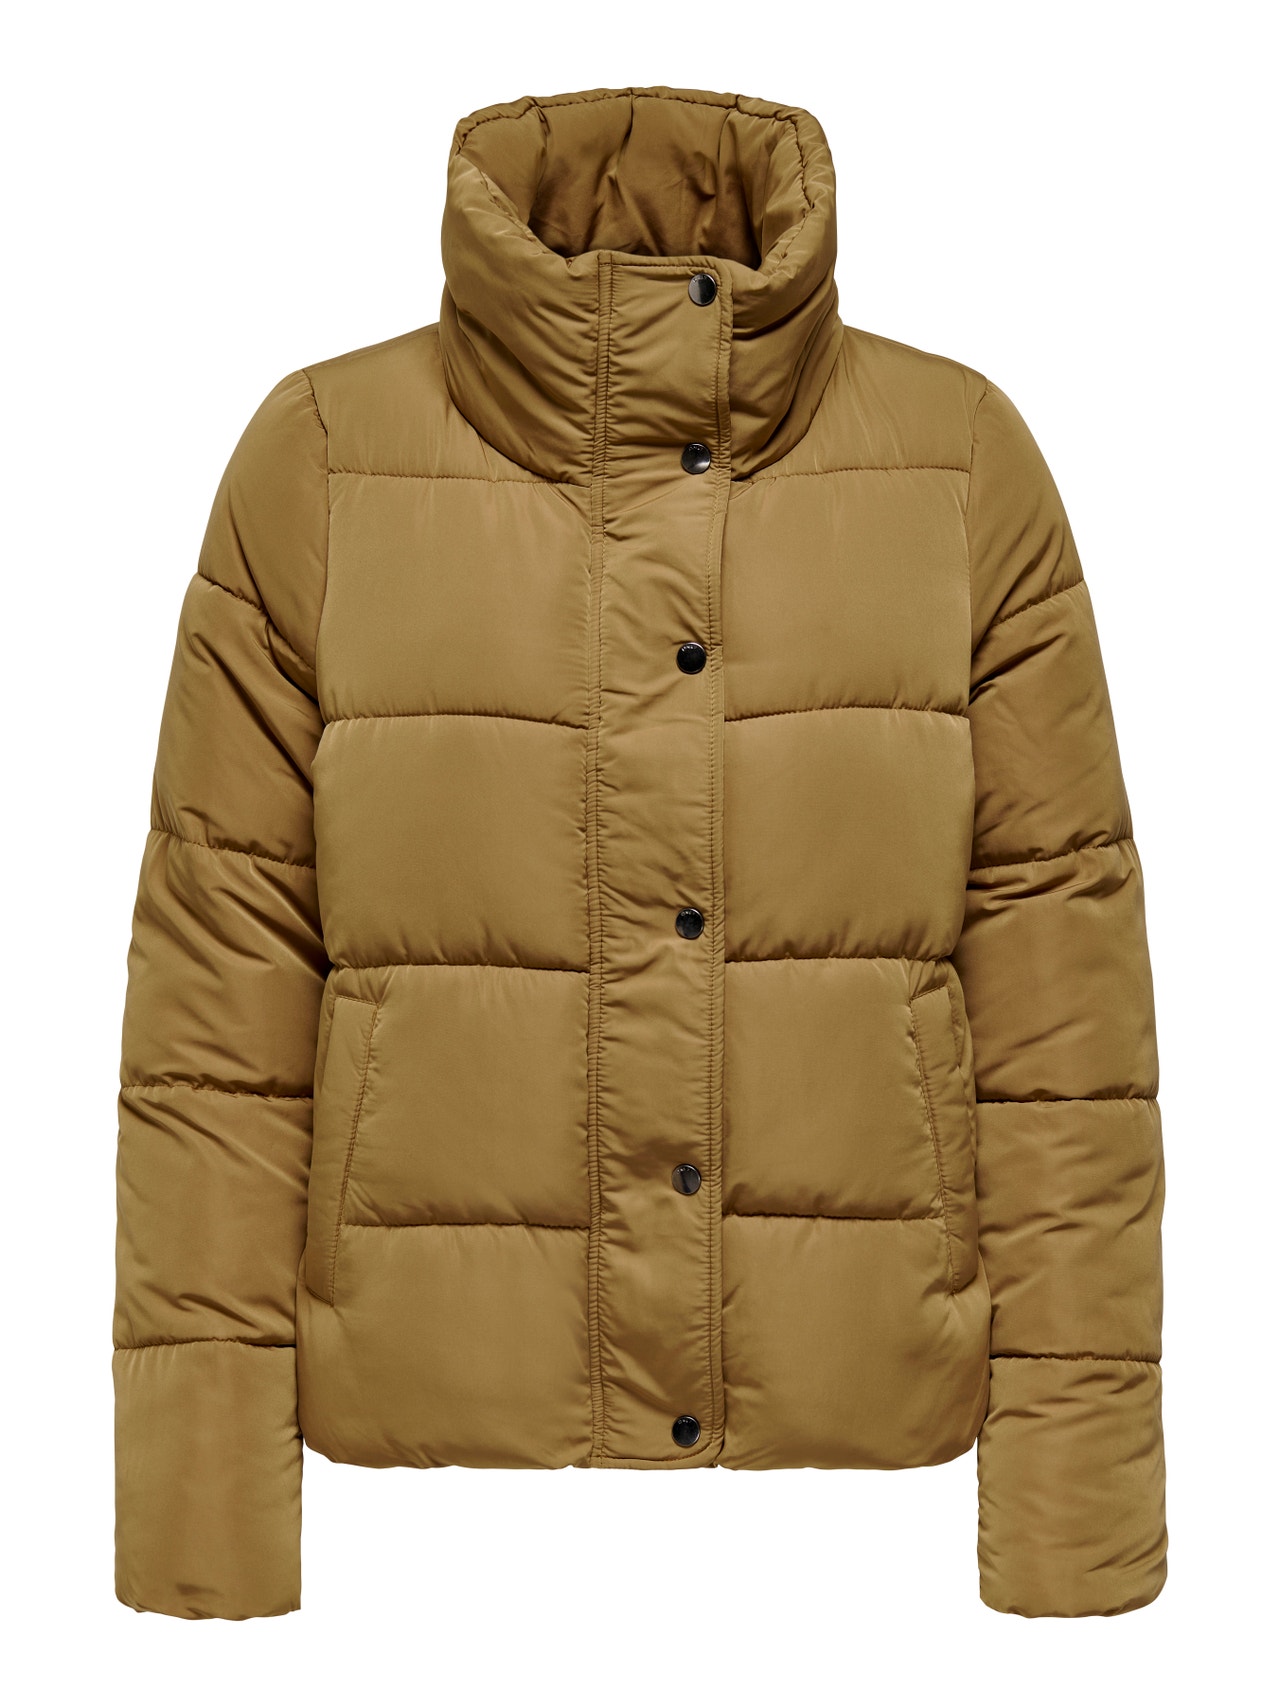 ONLY Hood Jacket -Toasted Coconut - 15196546